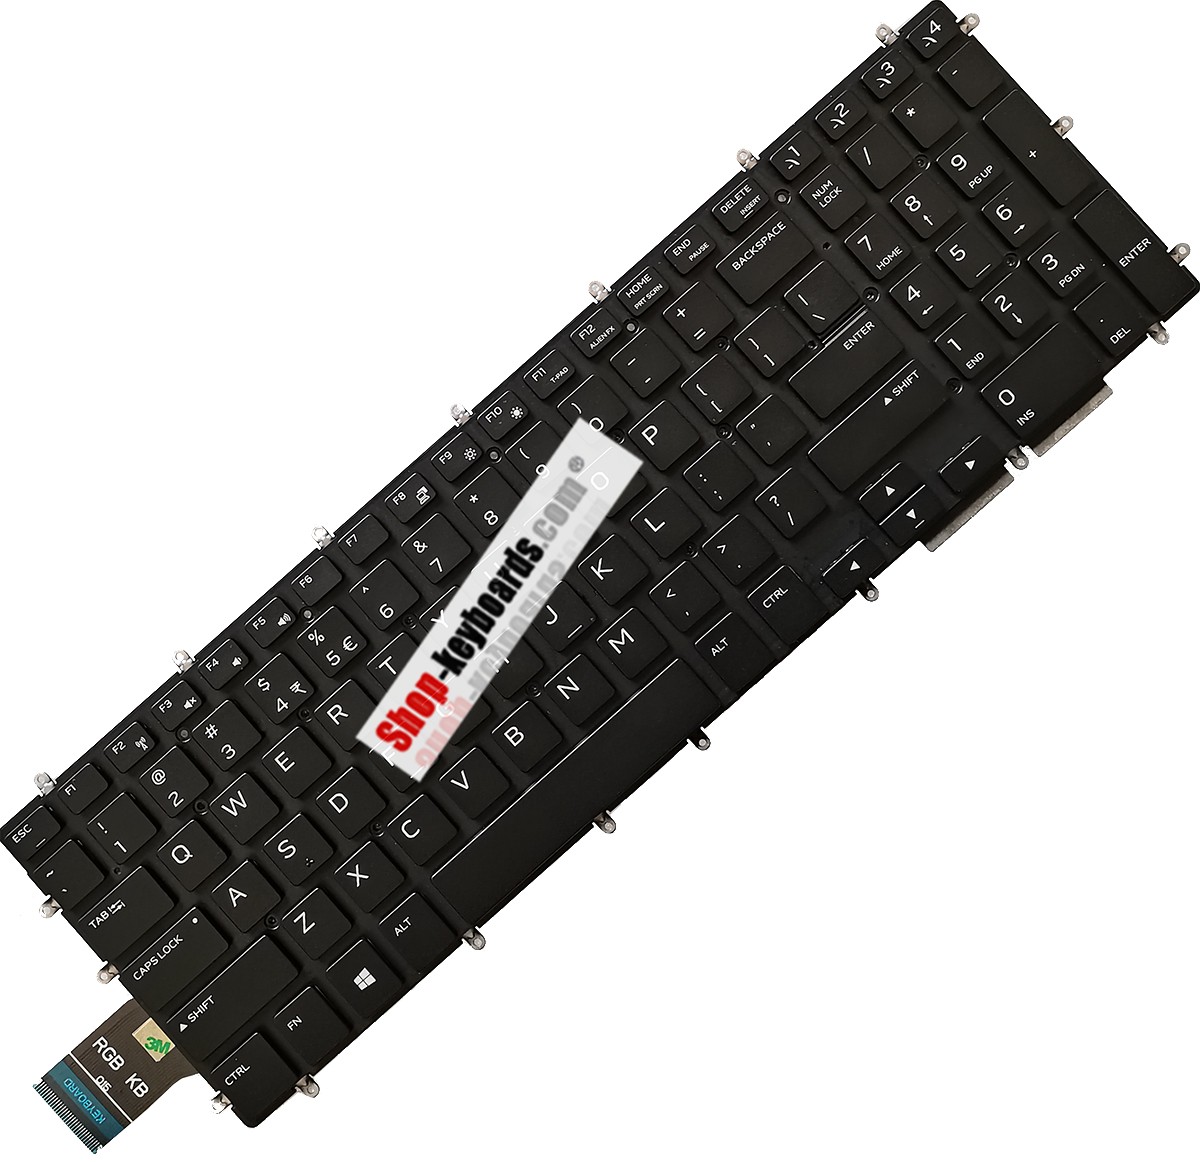 Dell 0KN4-0D1FR13 Keyboard replacement